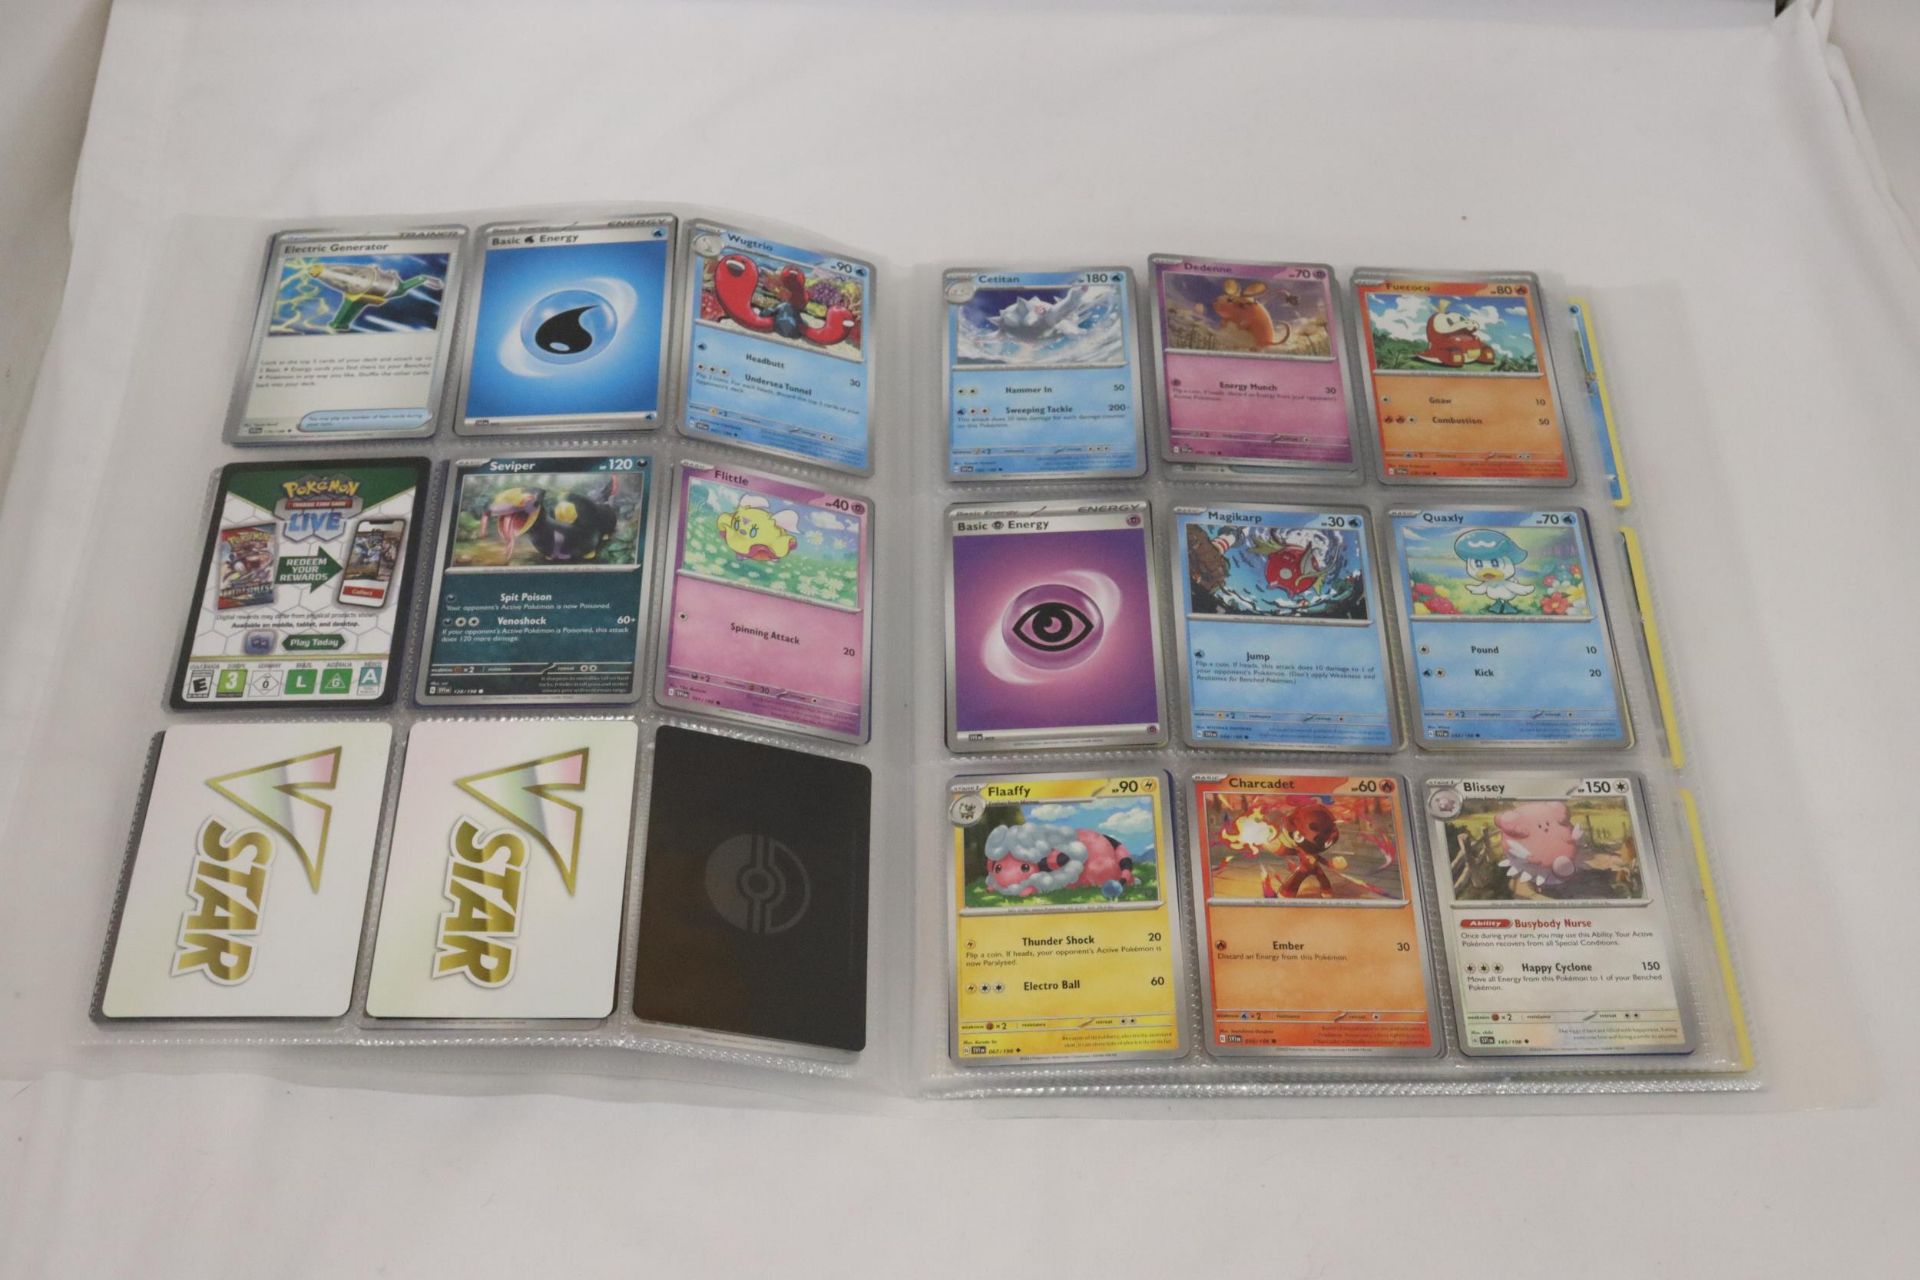 A PROTECTIVE TRADING CARD BINDER FULL OF POKEMON CARDS, INCLUDING SHINIES